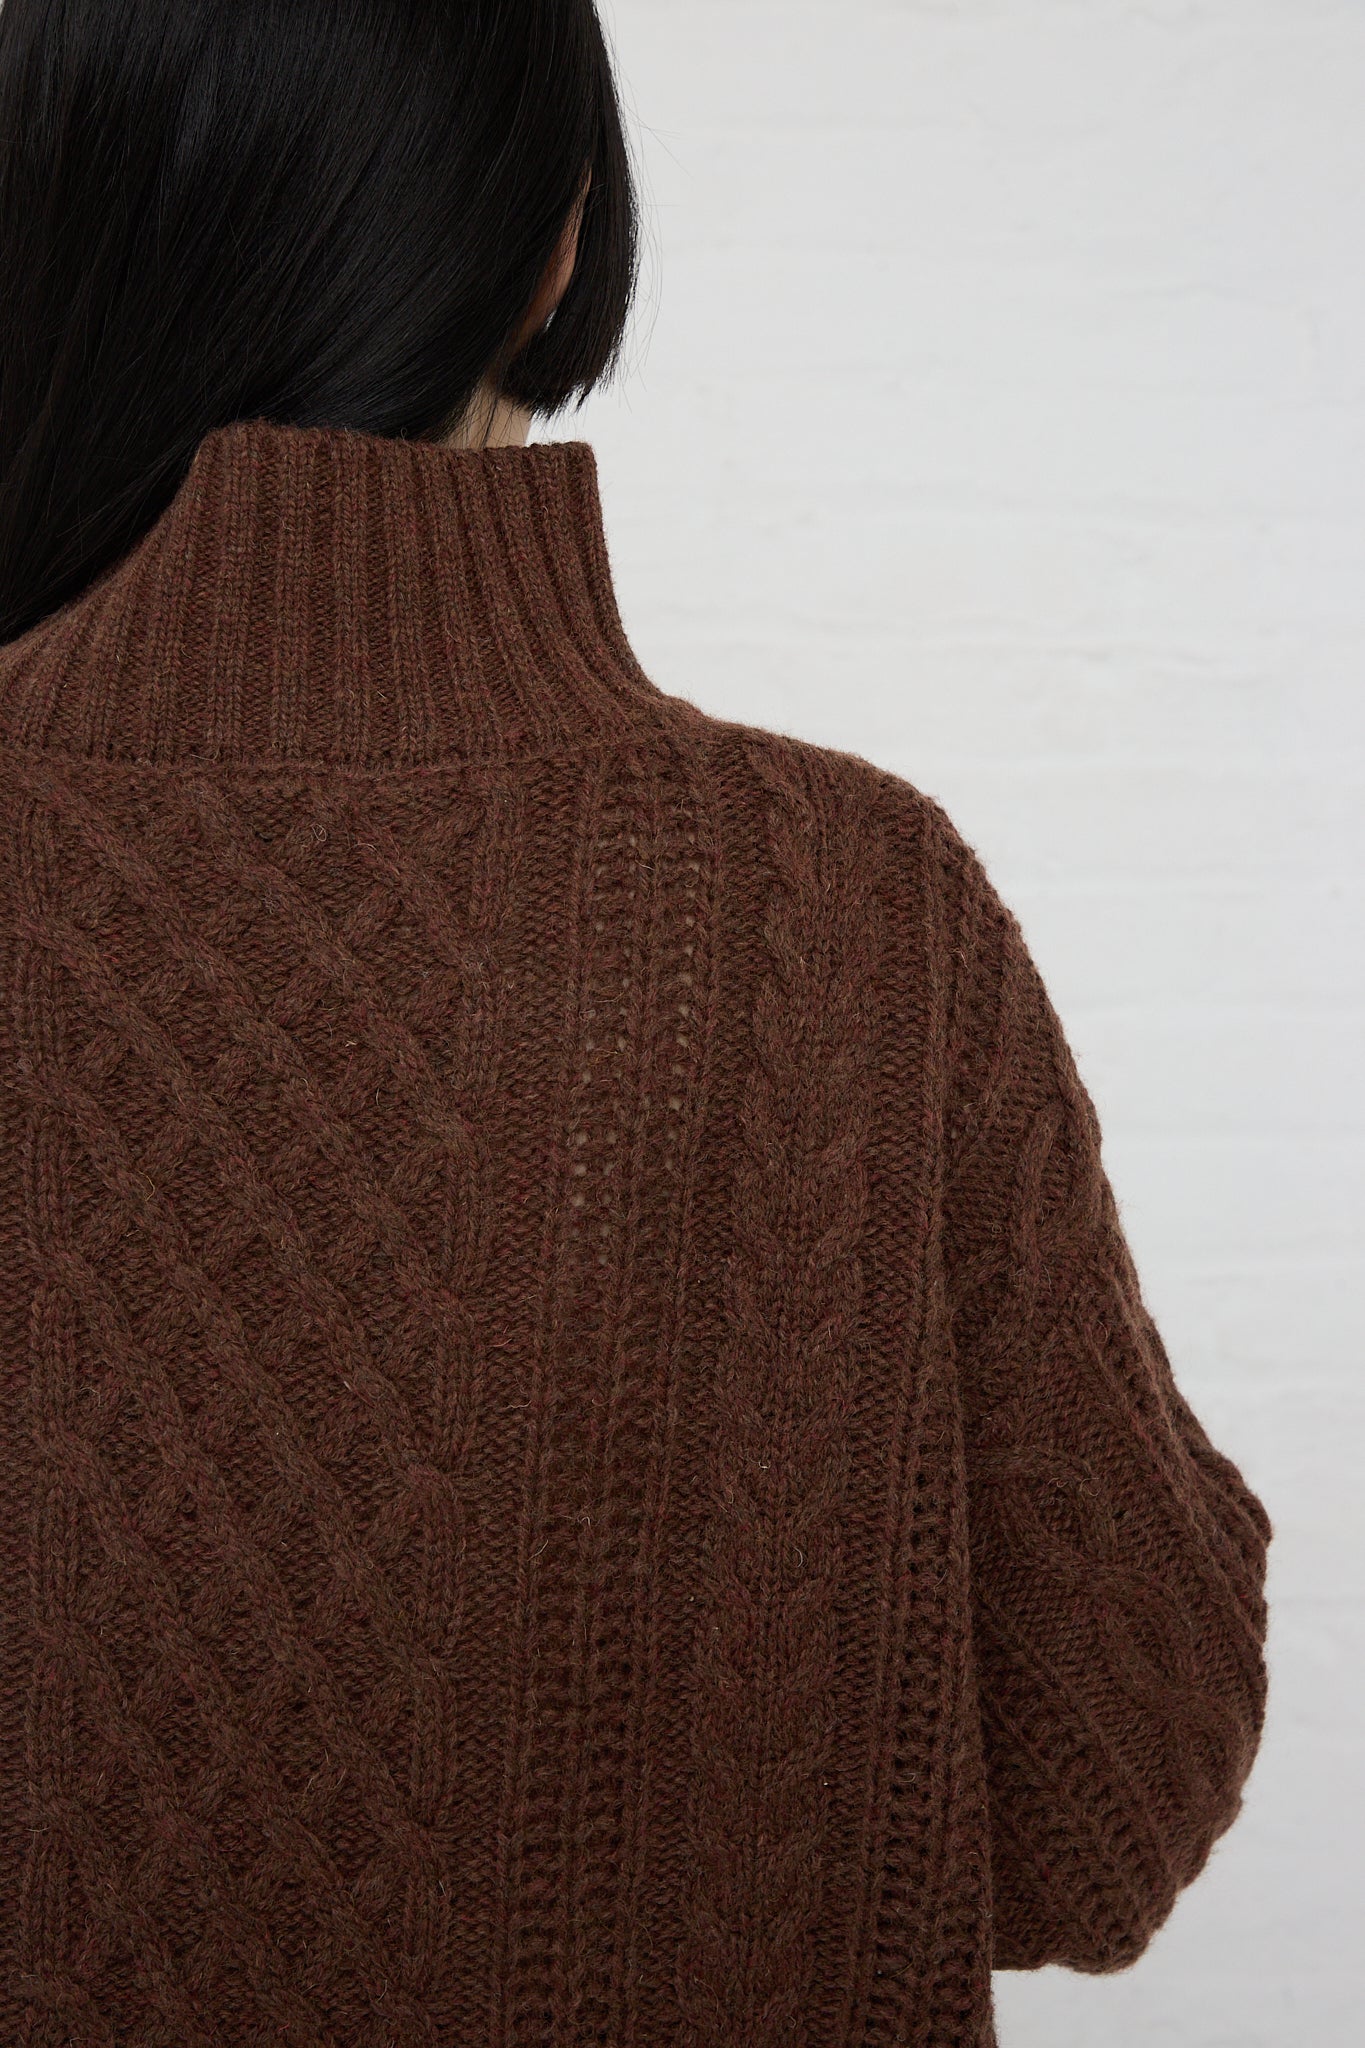 The relaxed fit, back view of a woman wearing an Ichi brown cable knit turtleneck pullover.